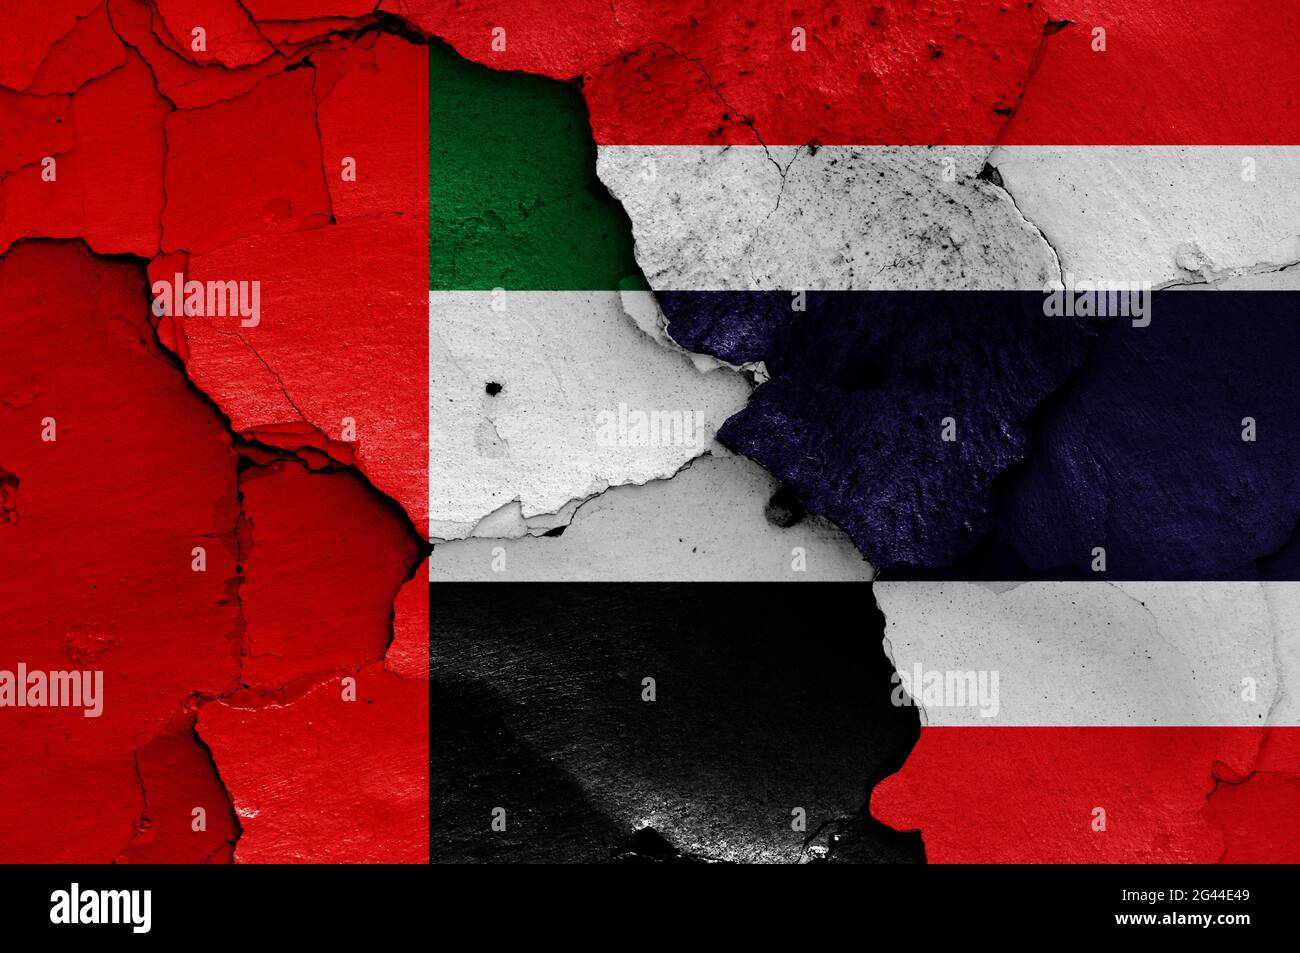 Flags of UAE and Thailand painted on cracked wall Stock Photo